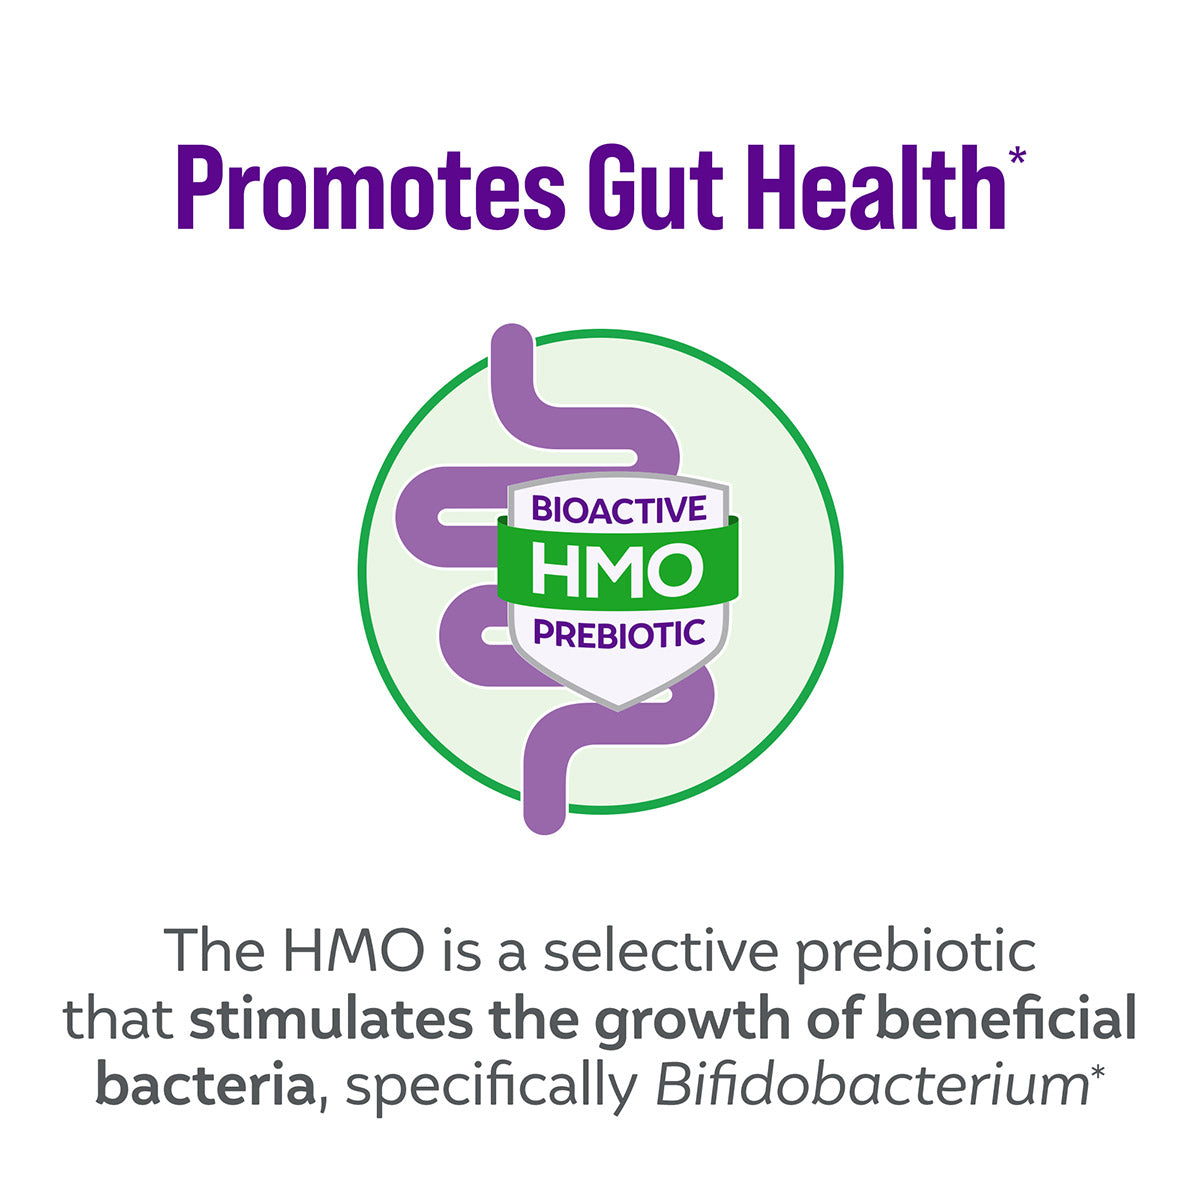 promotes gut health. Bioactive HMO prebiotic. The HOME is a selective prebiotic that stimulates the growth of beneficial bacteria, specifically Bifidobacterium.